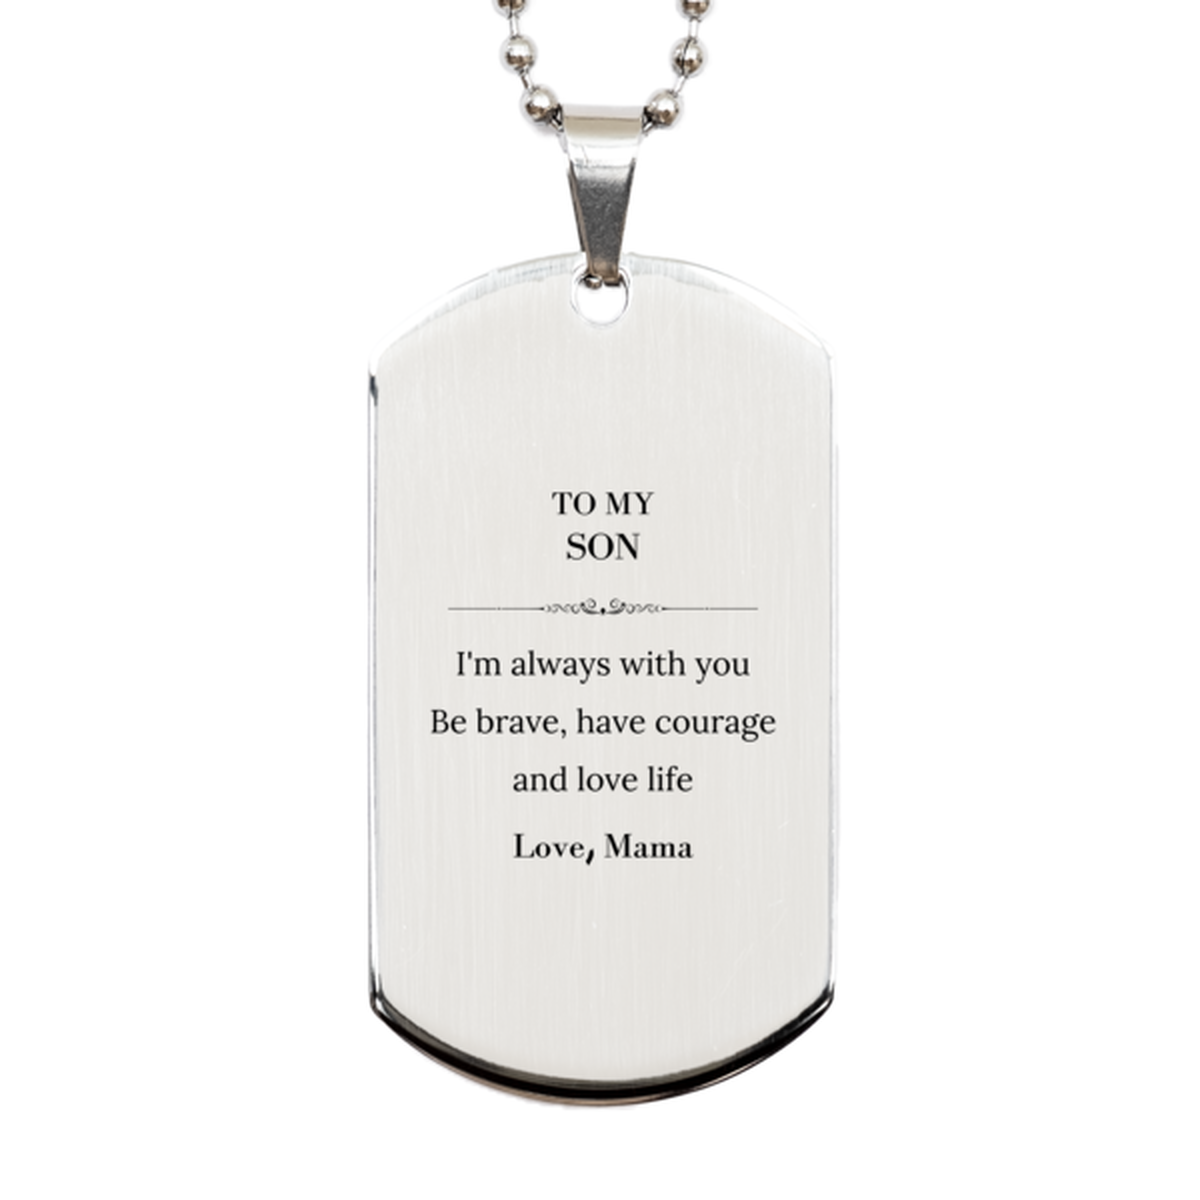 To My Son Gifts from Mama, Unique Silver Dog Tag Inspirational Christmas Birthday Graduation Gifts for Son I'm always with you. Be brave, have courage and love life. Love, Mama